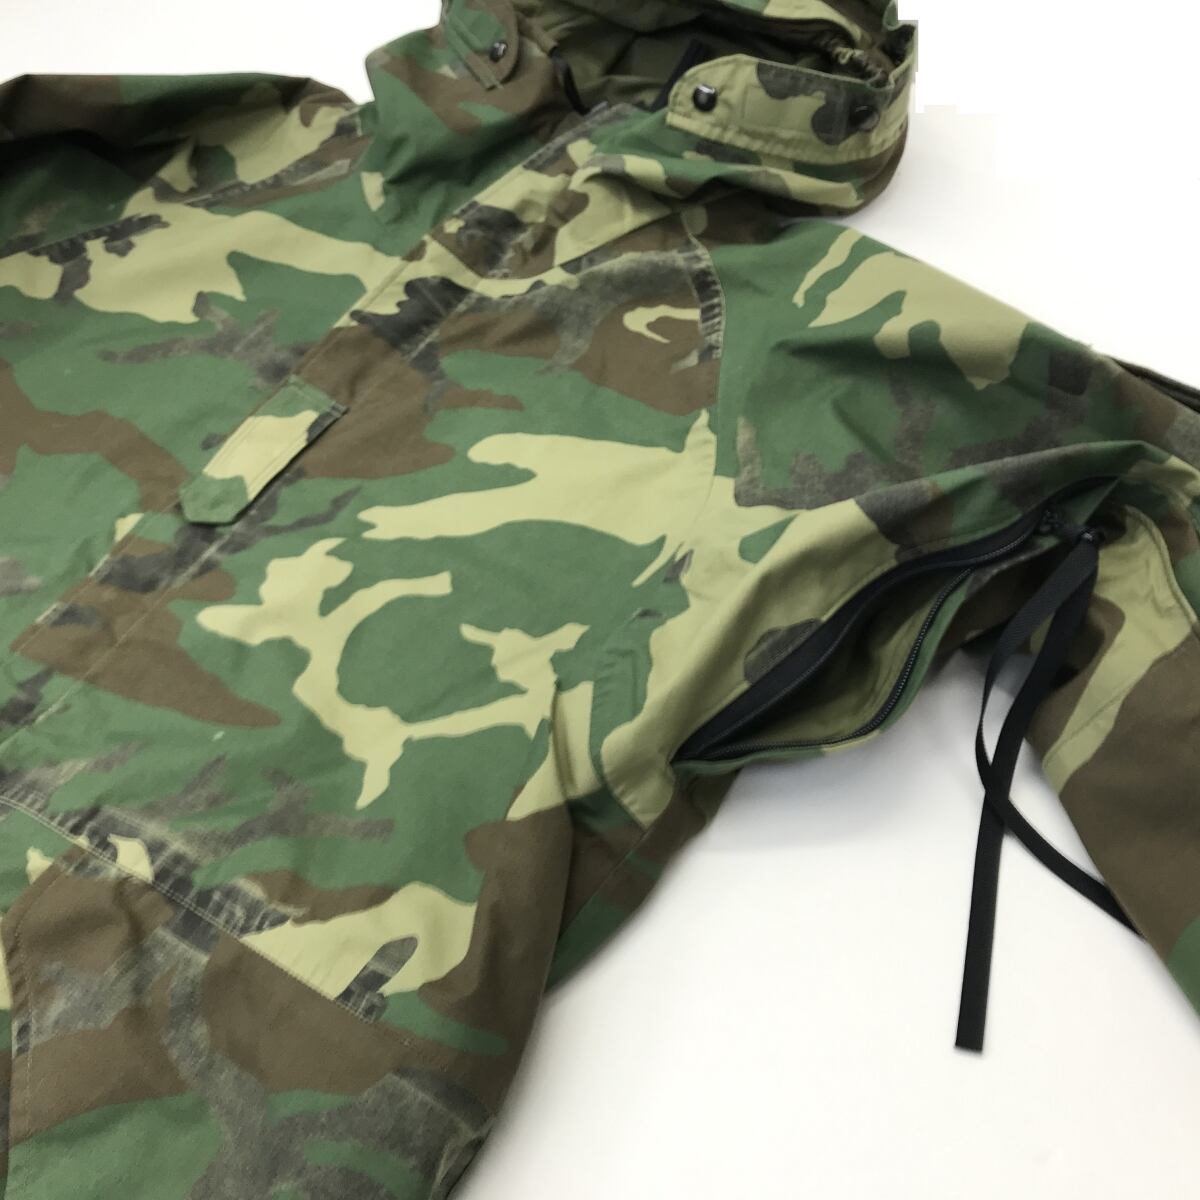 90's　PARKA COLD / WET WETHER CAMOUFLAGE